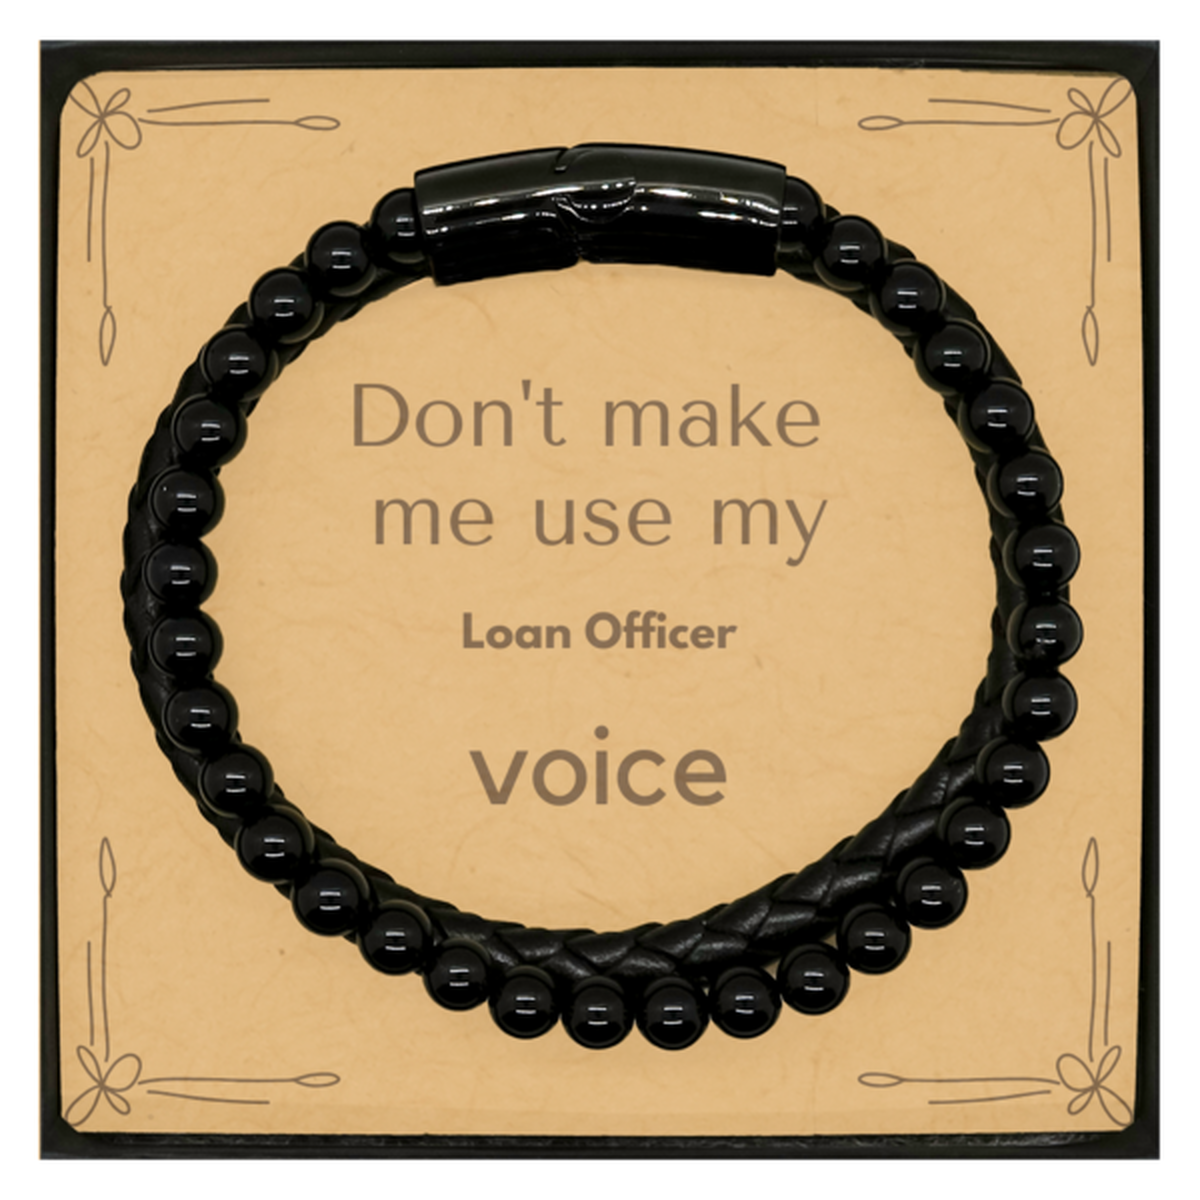 Don't make me use my Loan Officer voice, Sarcasm Loan Officer Card Gifts, Christmas Loan Officer Stone Leather Bracelets Birthday Unique Gifts For Loan Officer Coworkers, Men, Women, Colleague, Friends